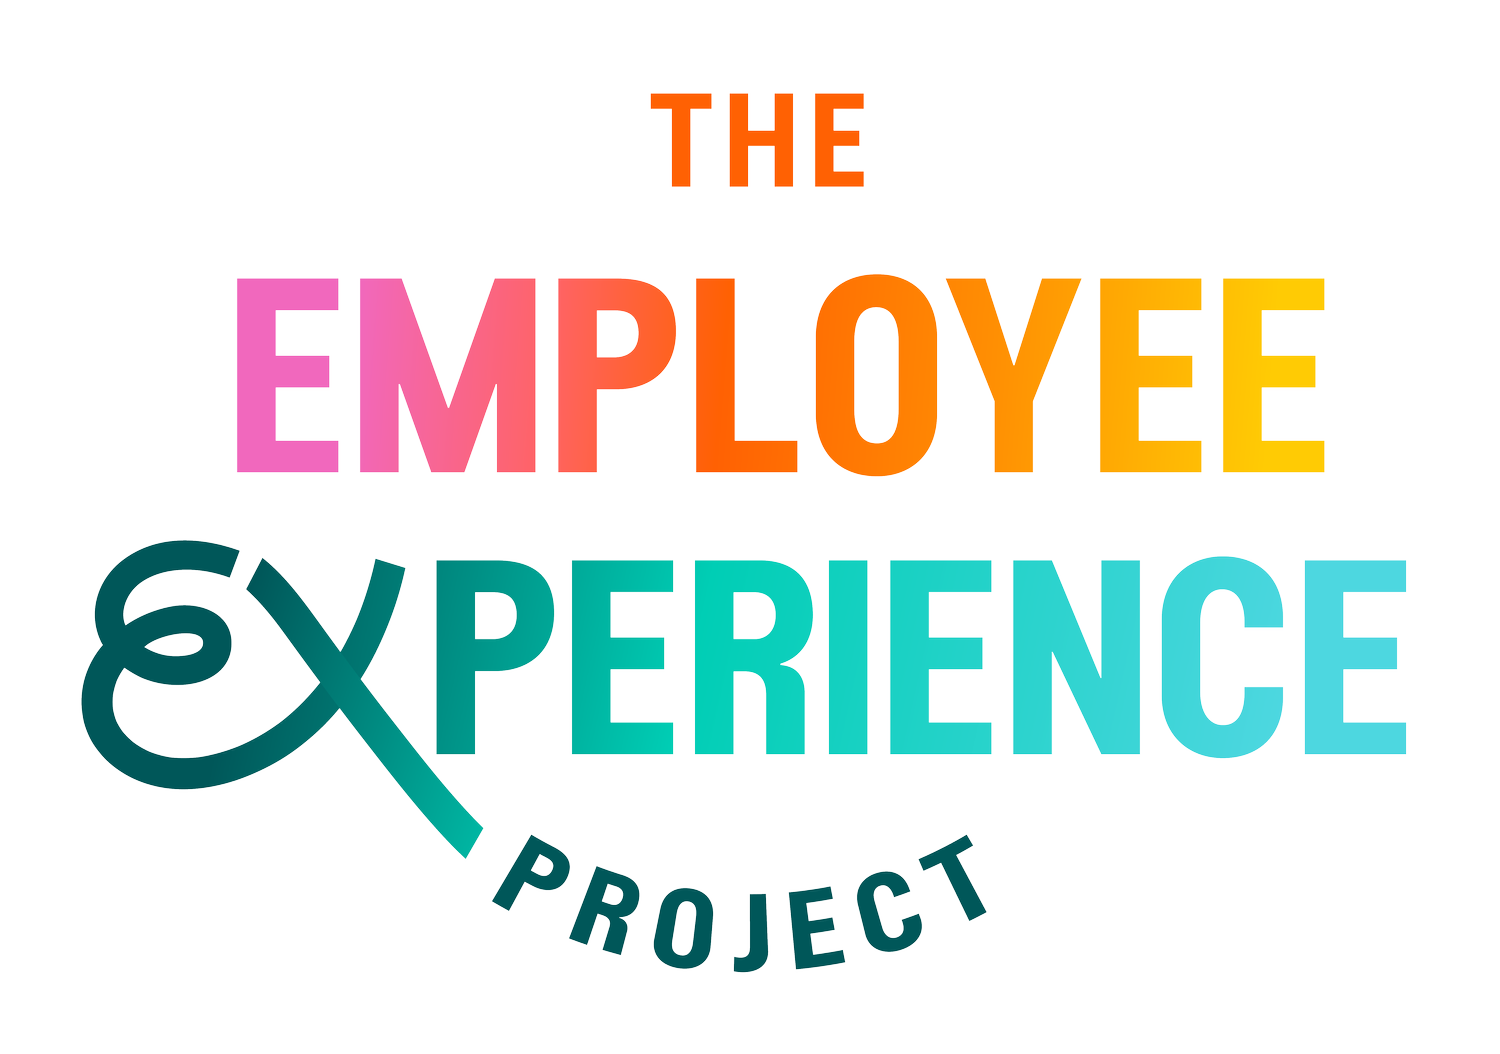 The Employee Experience Project | Where people thrive, businesses prosper